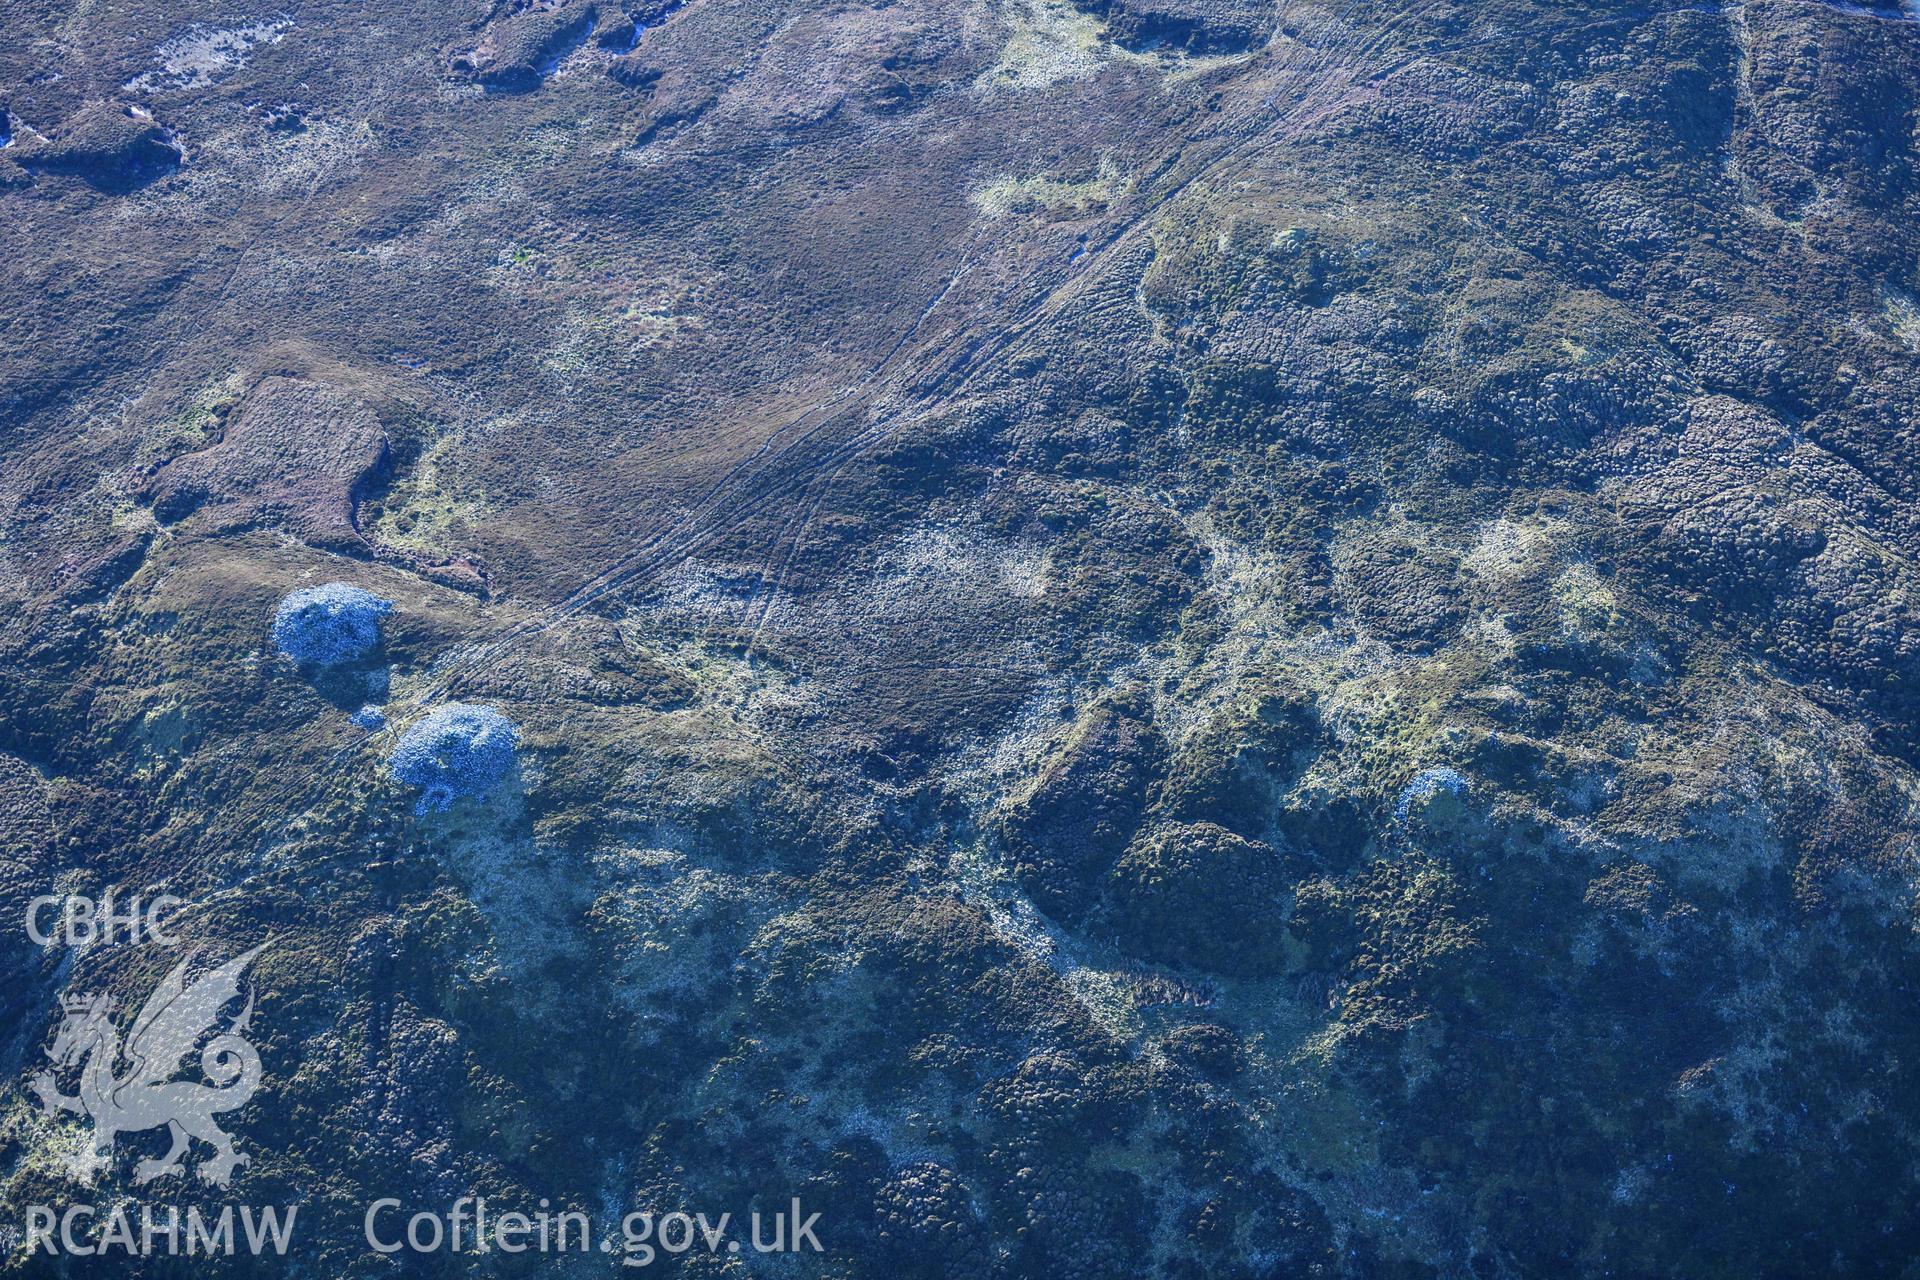 Oblique aerial photograph of cairn pair and outlier at Cairn Biga cairn taken during the Royal Commission’s programme of archaeological aerial reconnaissance by Toby Driver on 17th January 2022